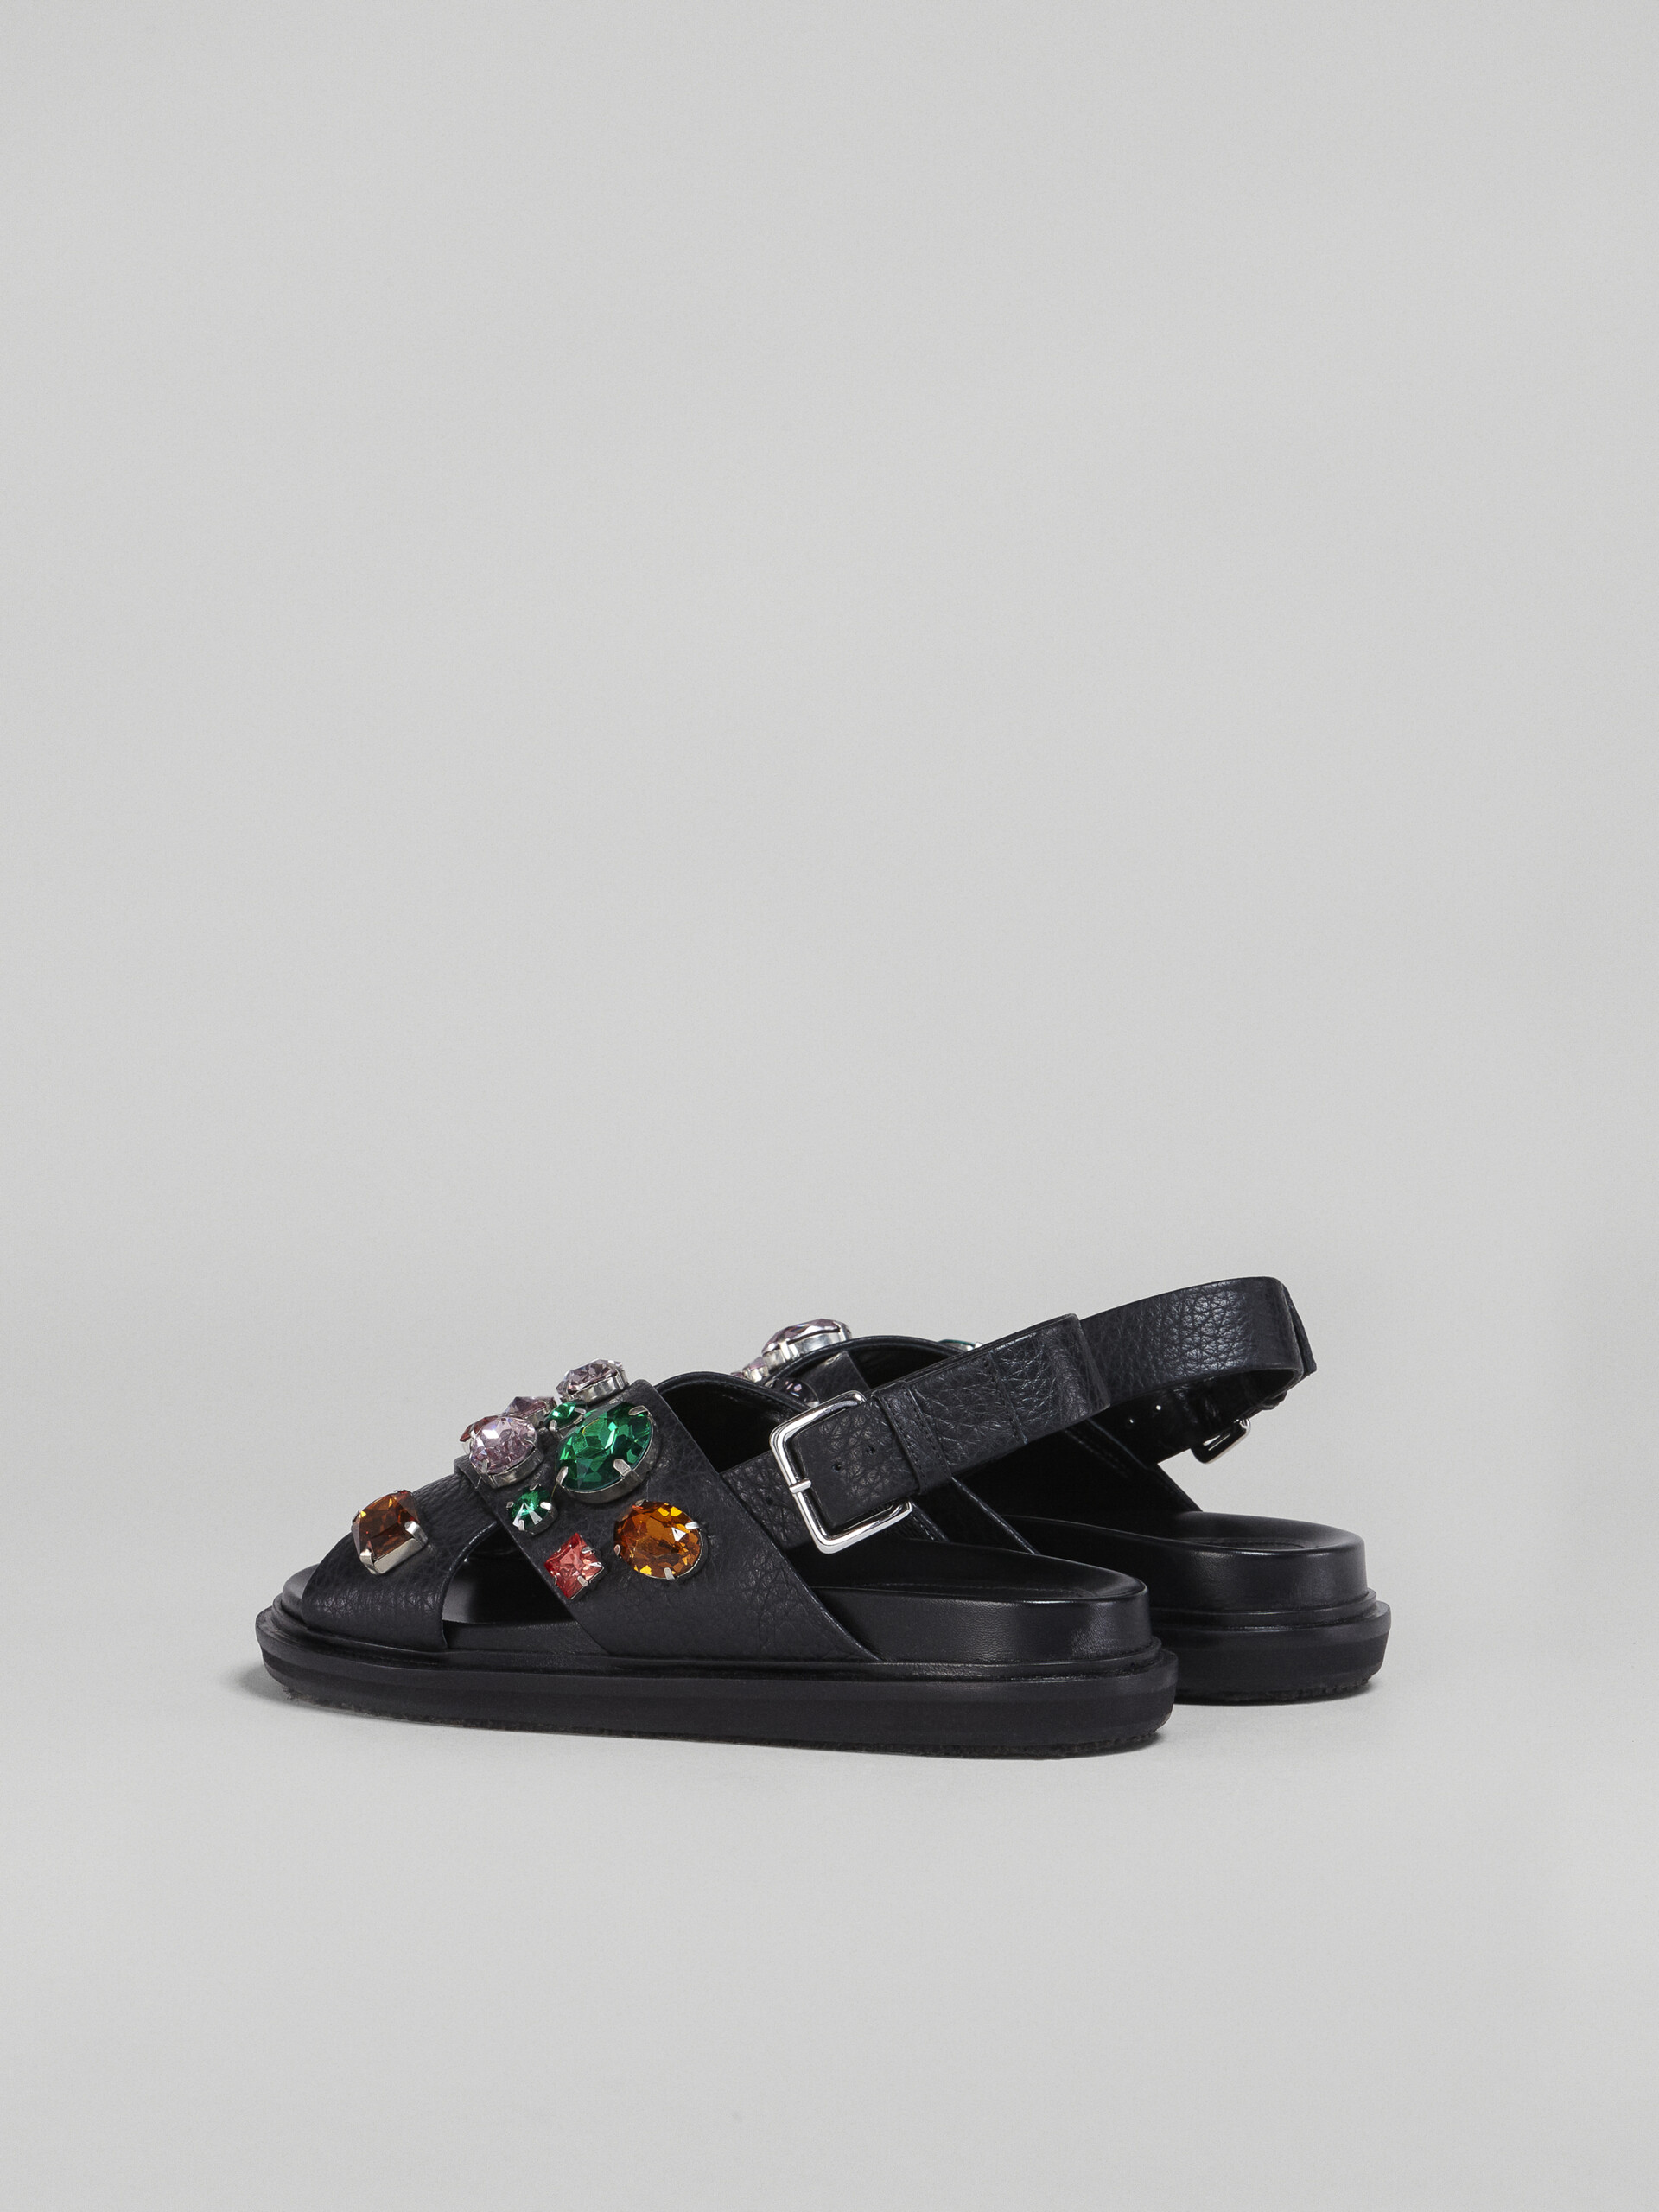 Glass beads grained leather fussbett - Sandals - Image 3